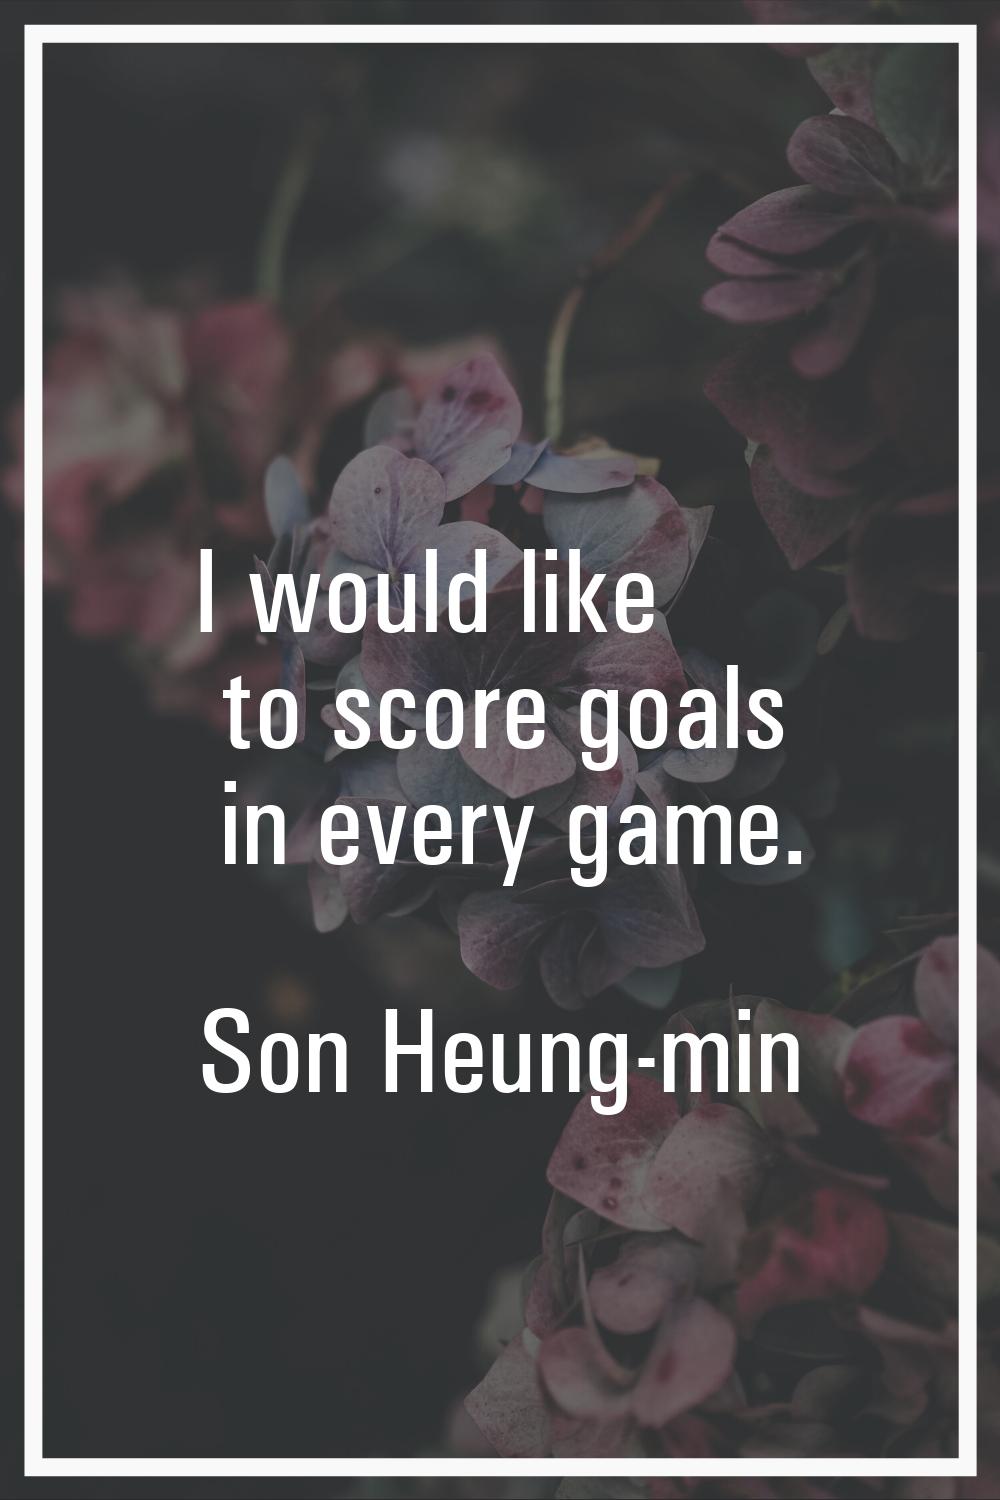 I would like to score goals in every game.